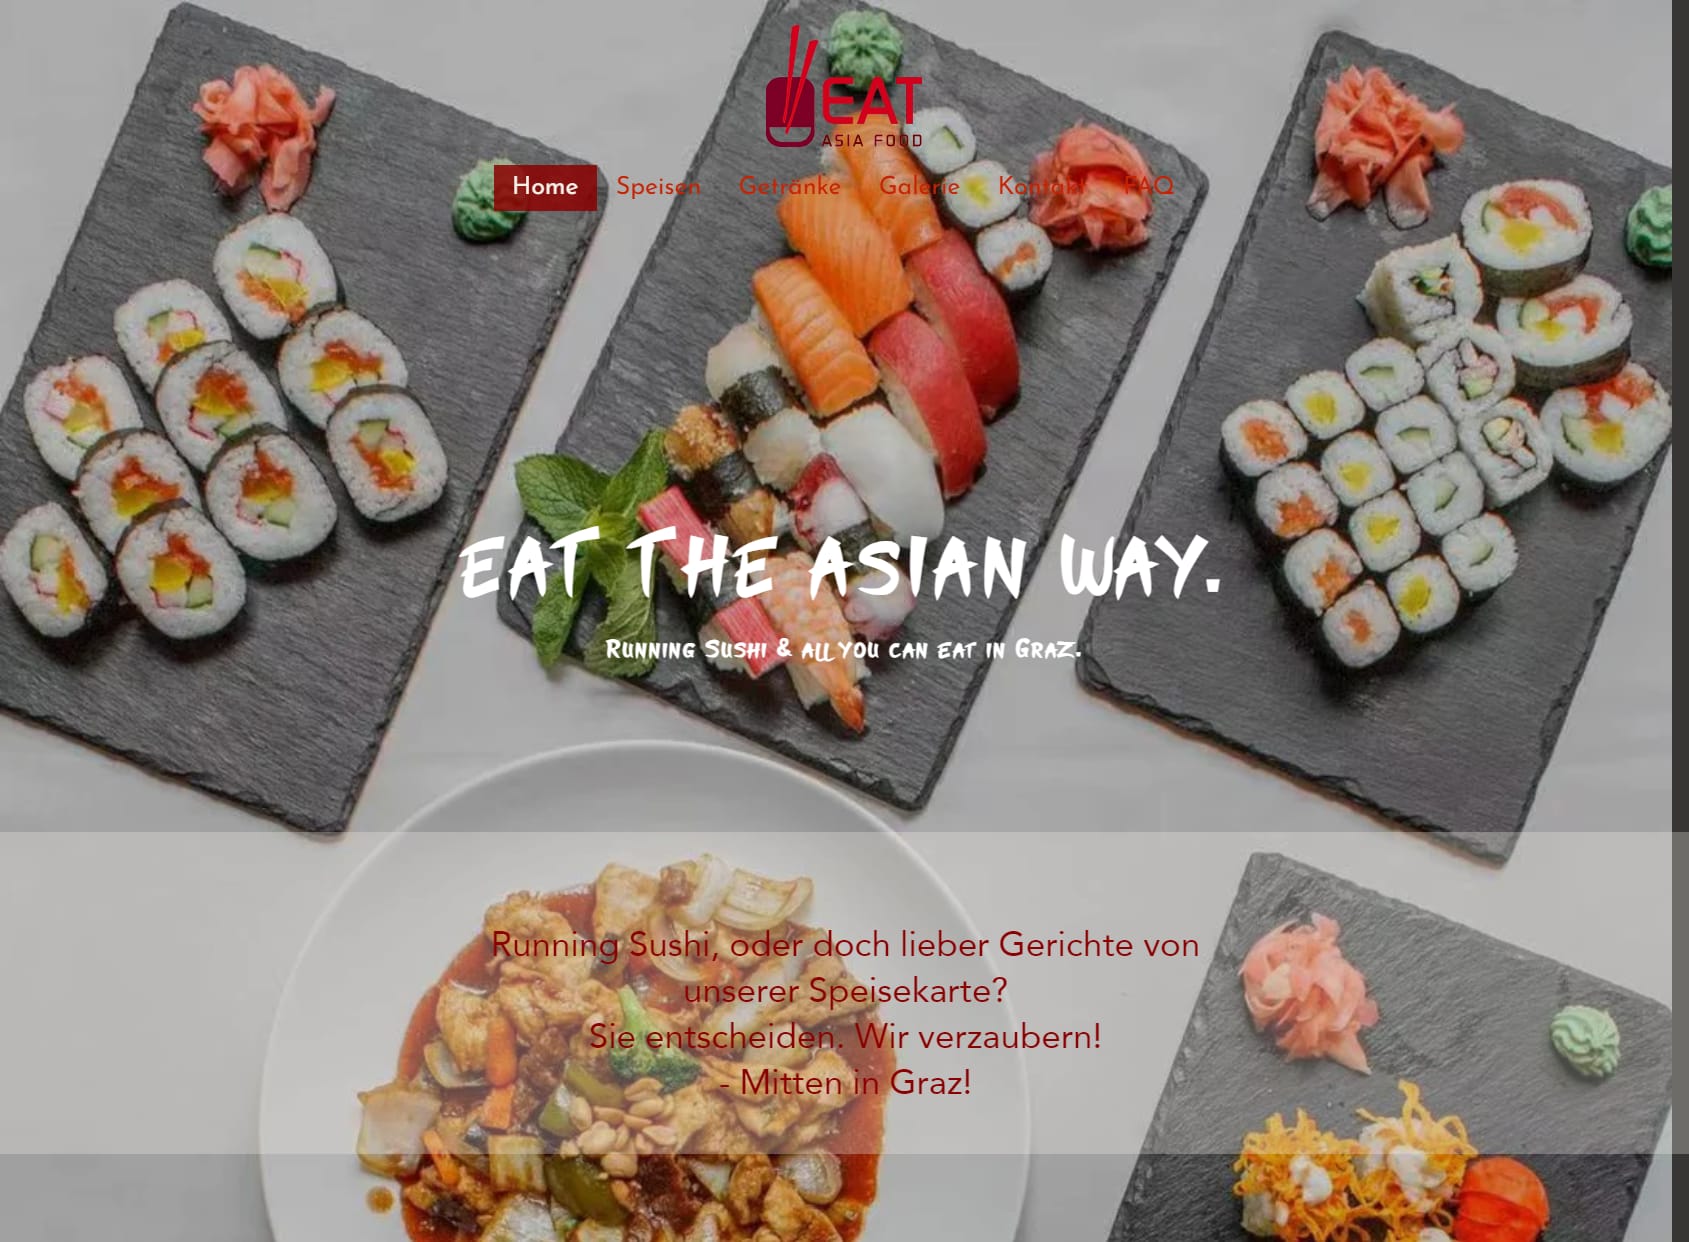 Eat Asia Food - Running Sushi & all you can eat in Graz